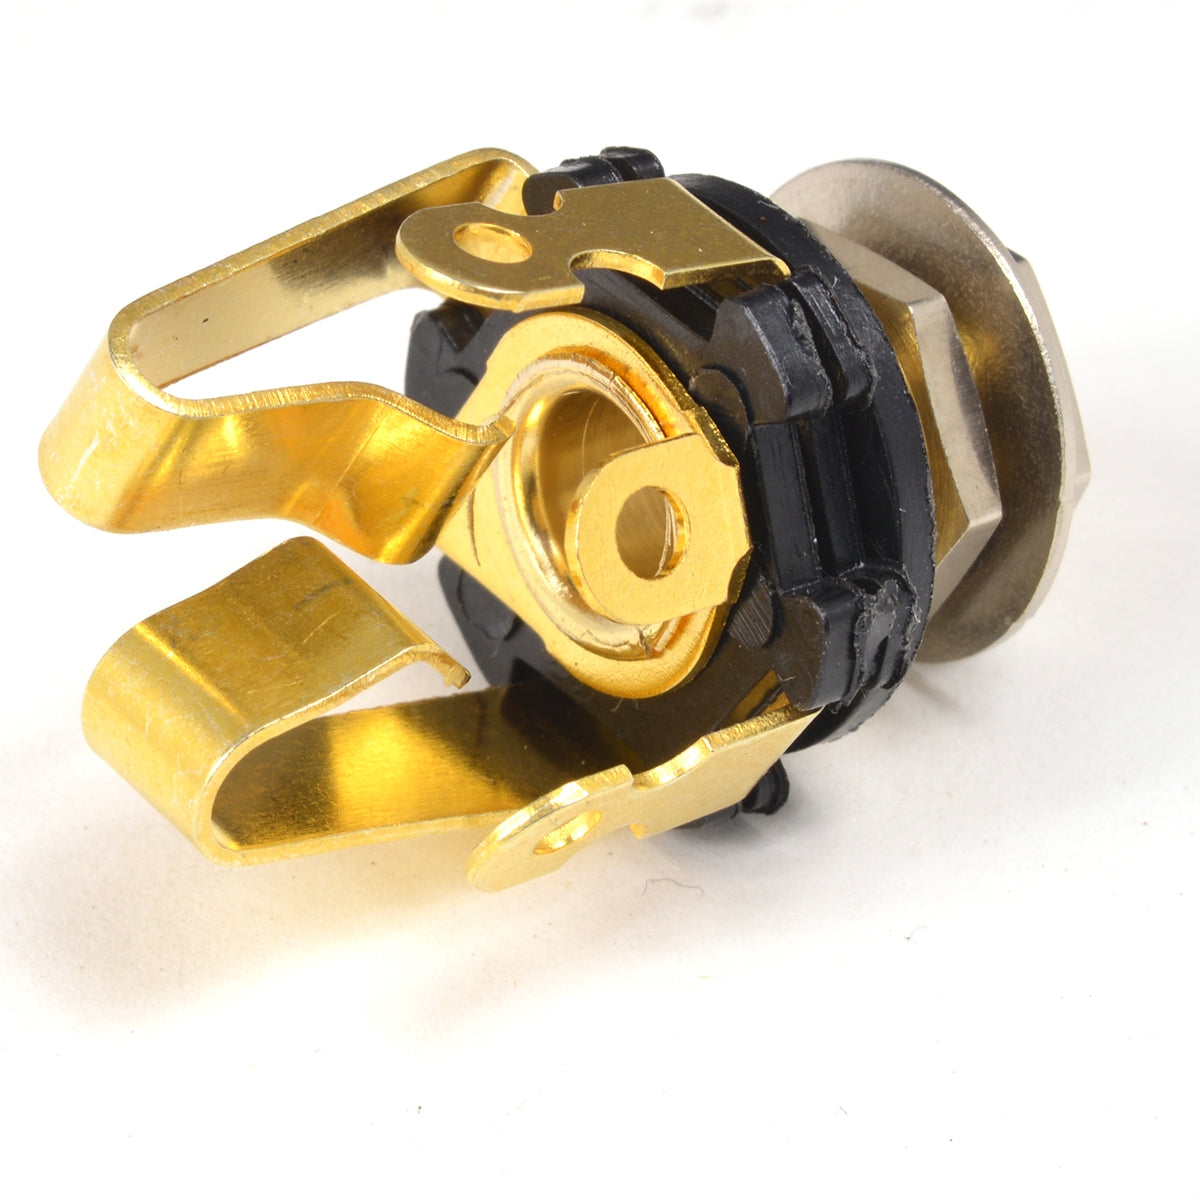 Gold plated stereo jack socket